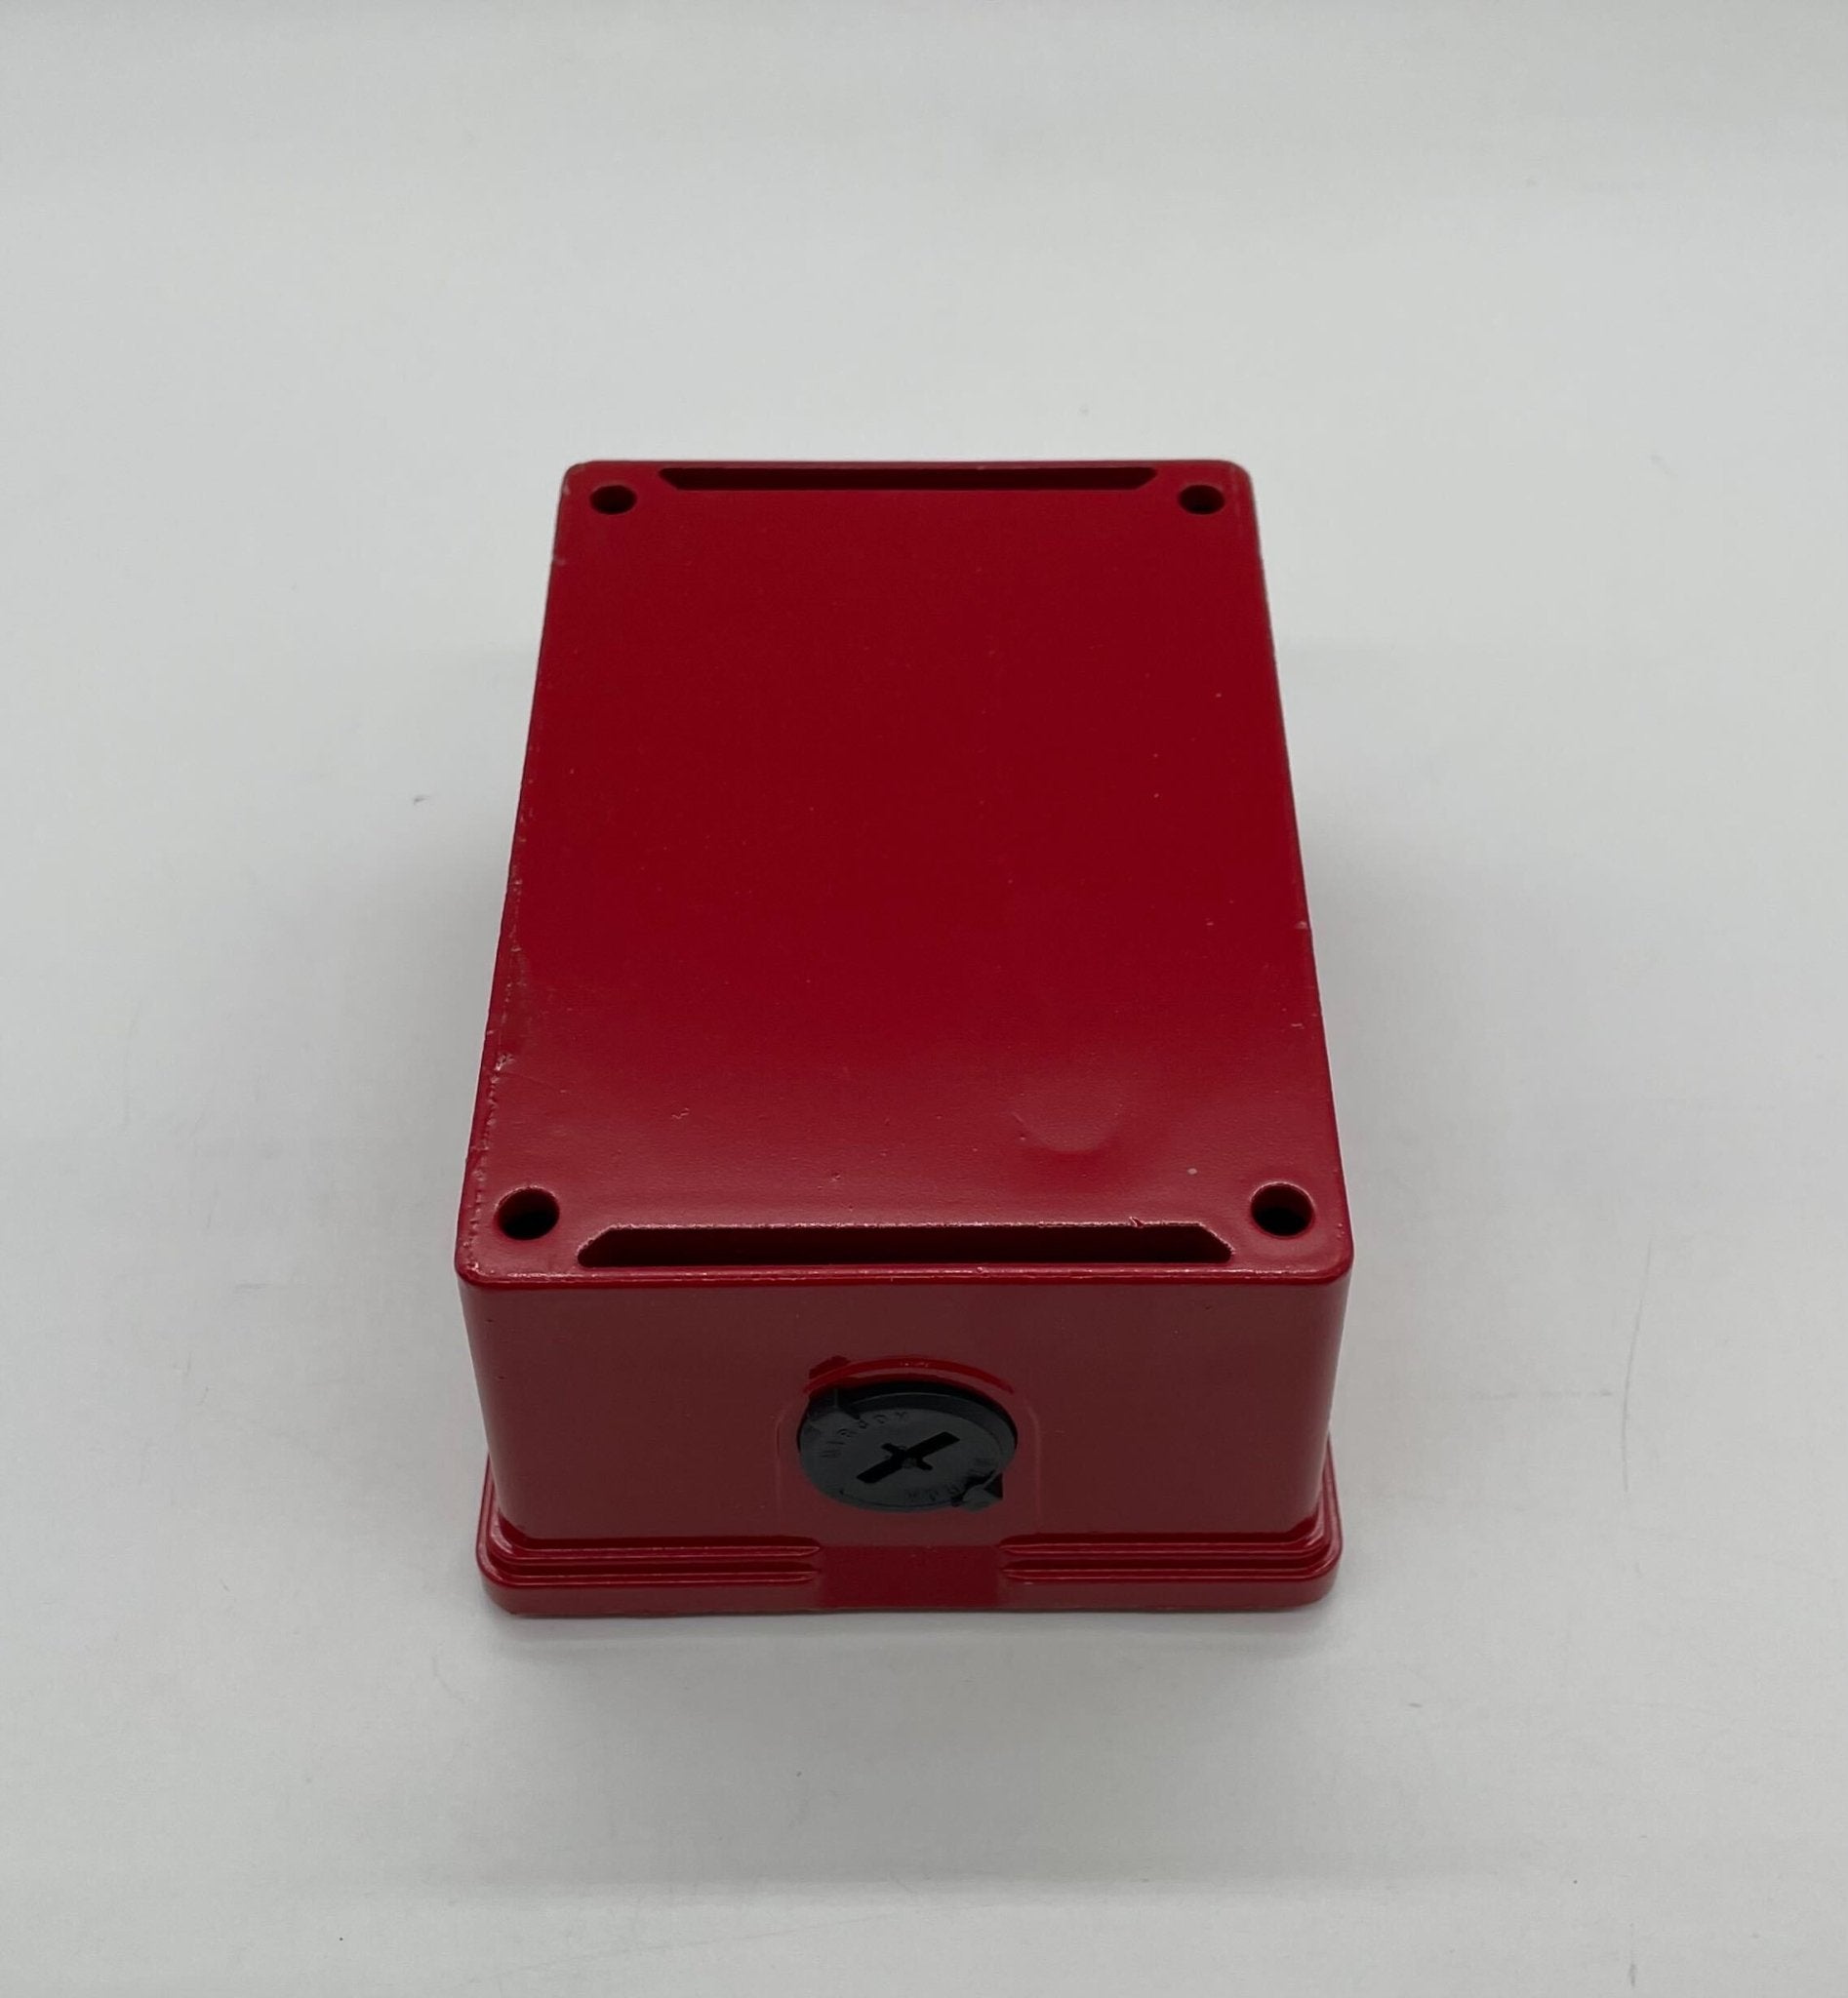 Mircom BB-700WP Weather Proof Surface Mount Box - The Fire Alarm Supplier